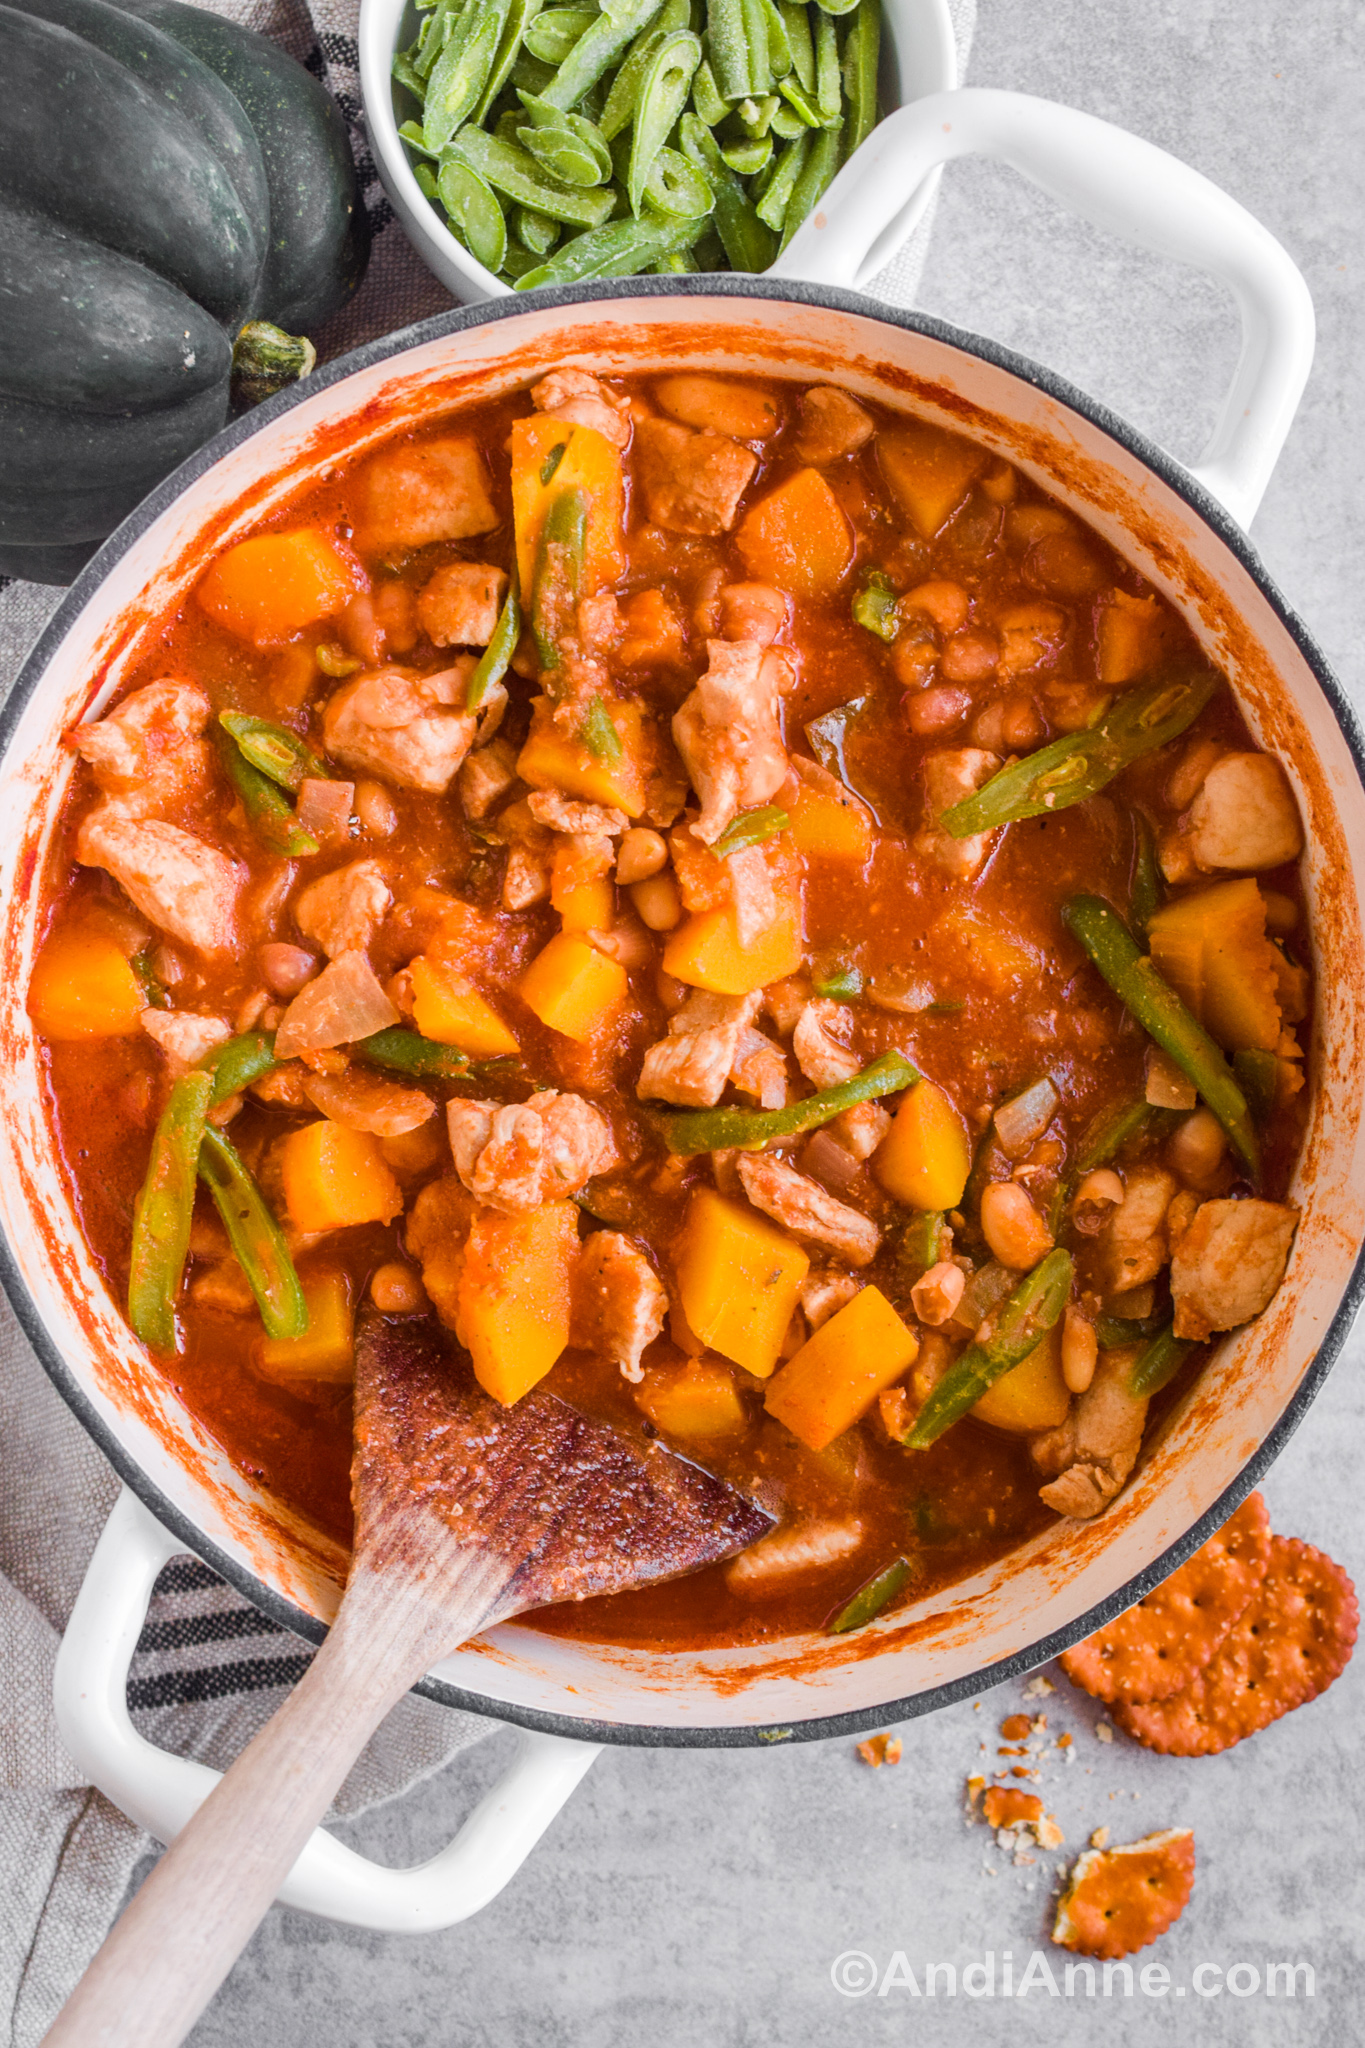 Pork and squash stew in a white pot with a wood spatula. A bowl of green beans, an acorn squash and some crackers surround the bowl.